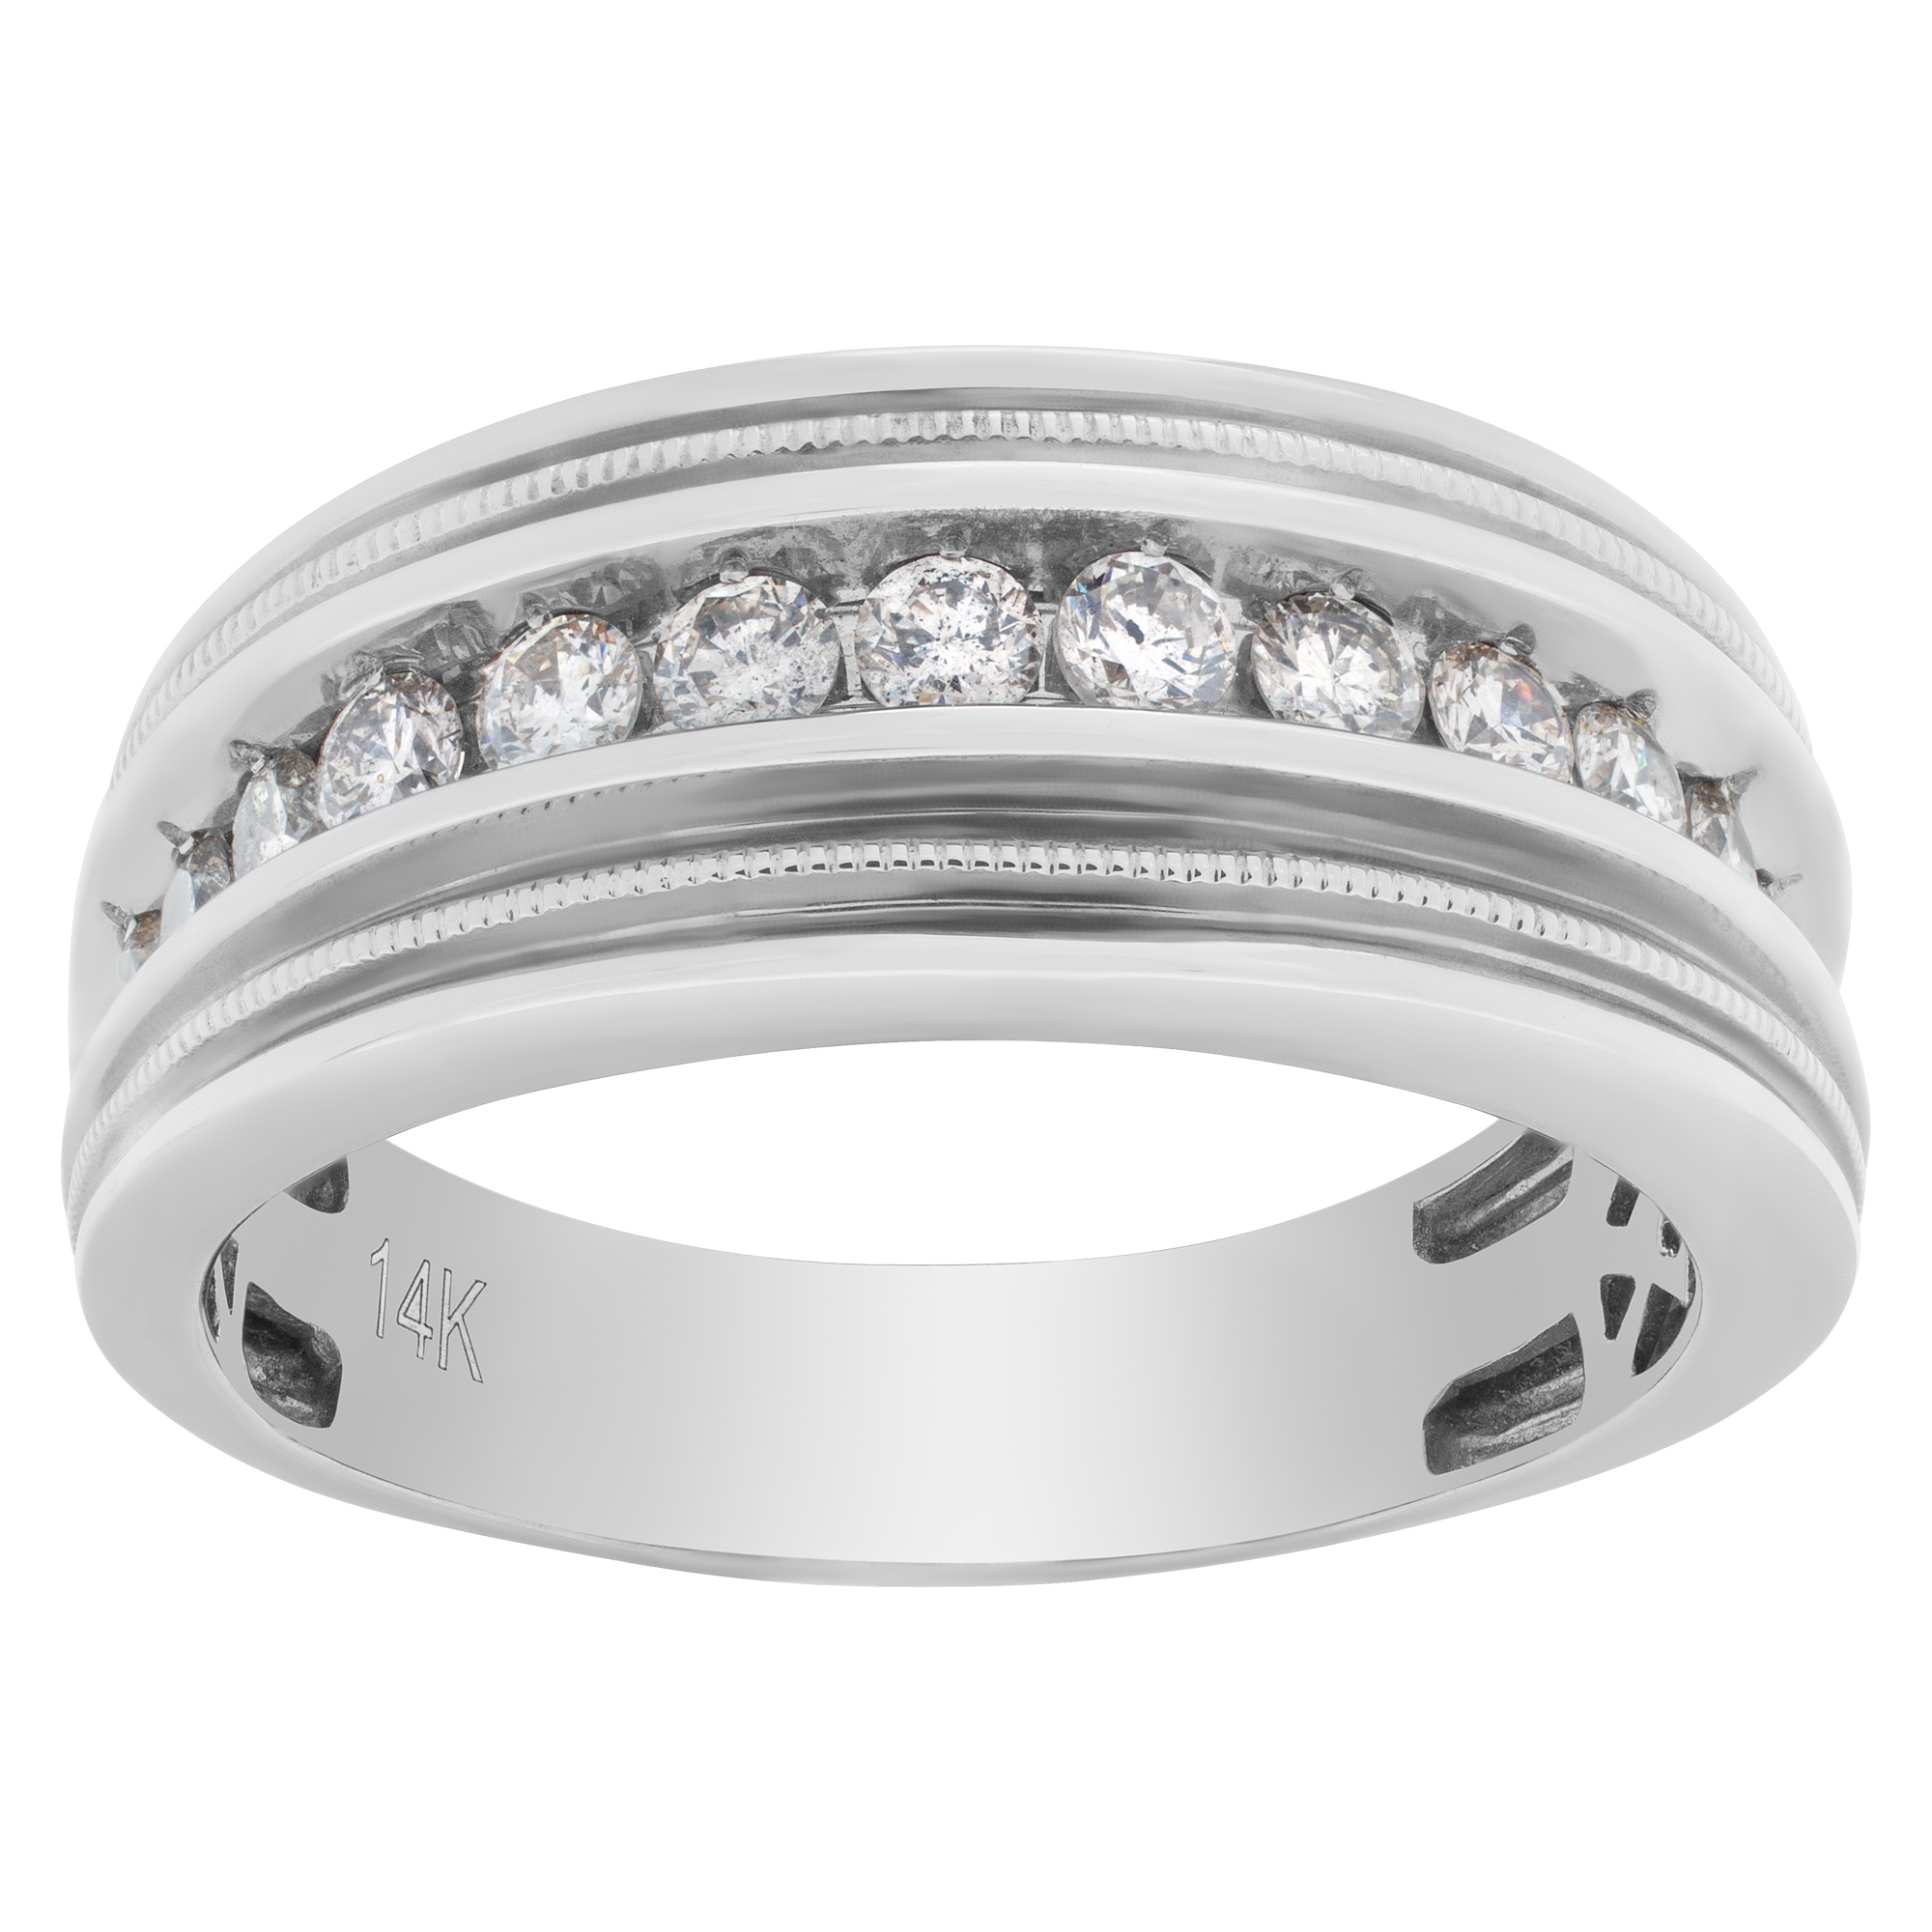 Diamond ring in 14k white gold with approx. 1 carat full cut round brilliant diamonds.